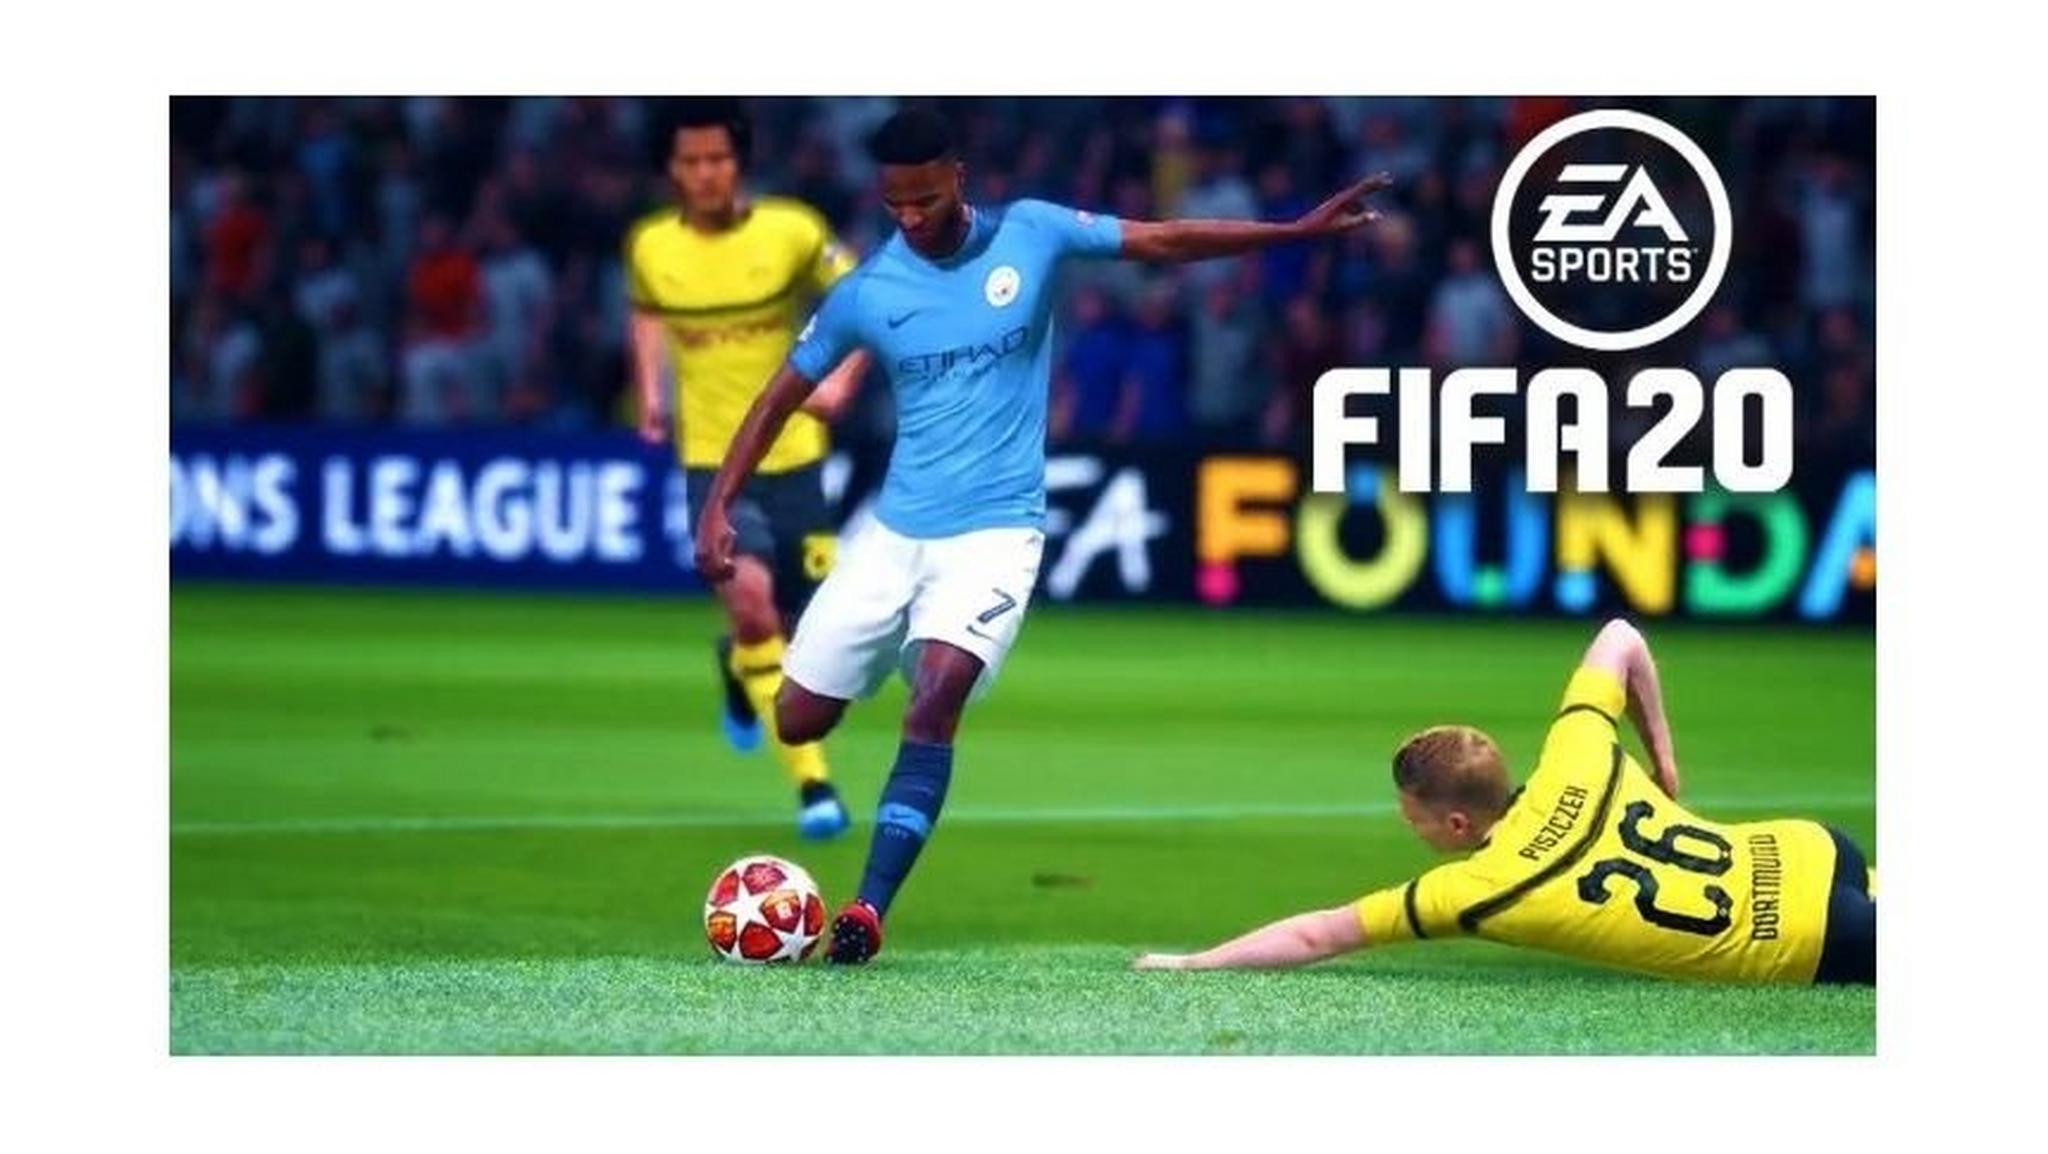 PRE-ORDER FIFA 20 Champions Edition - PlayStation 4 Game